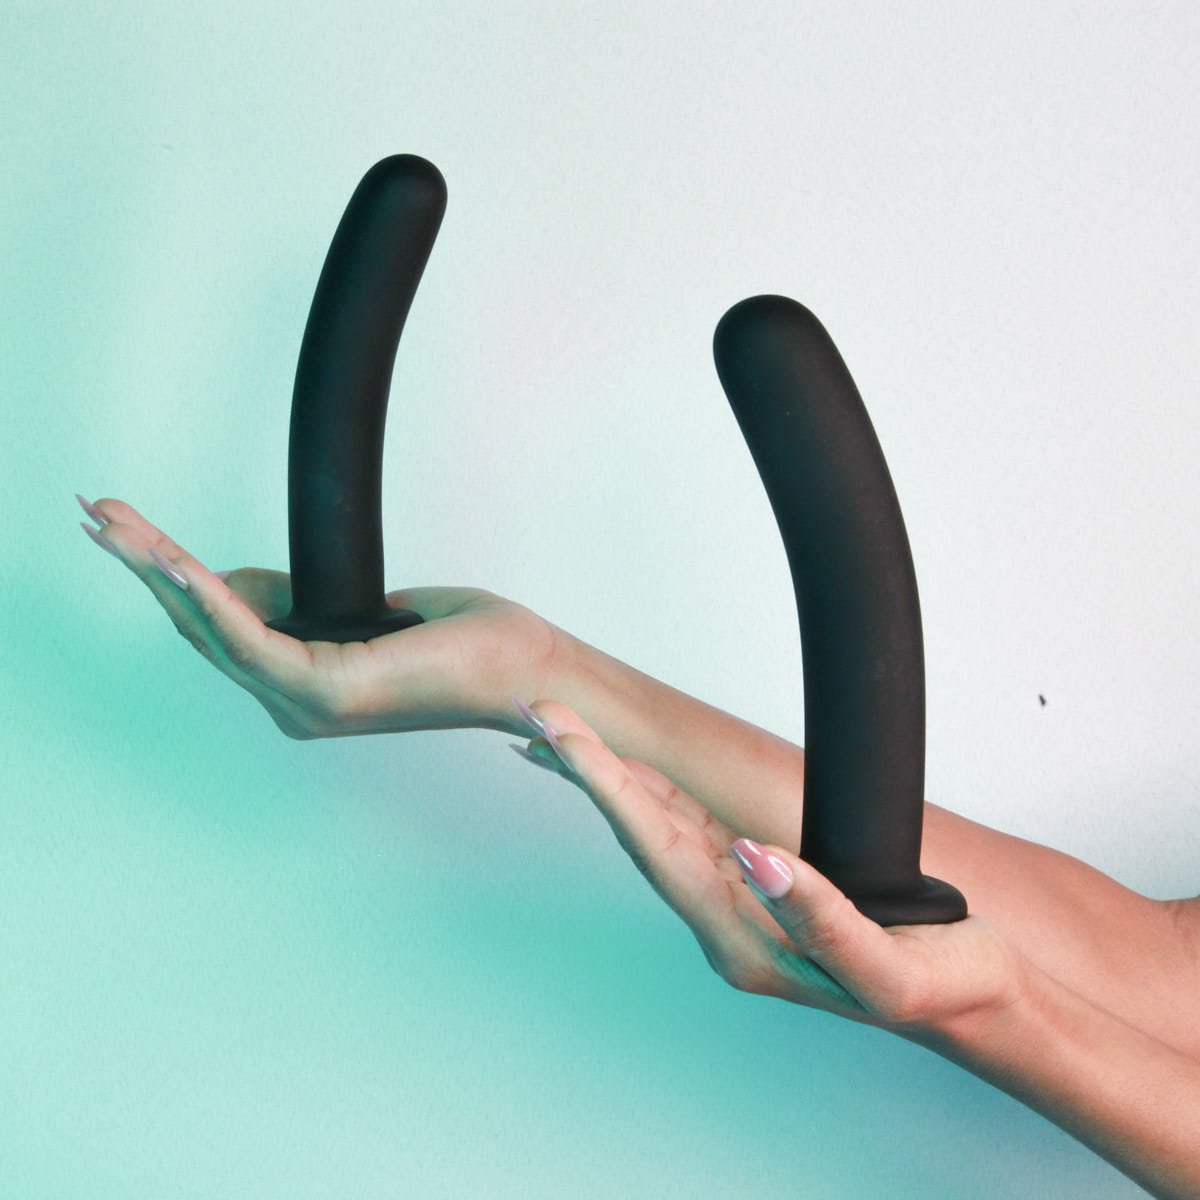 two hands Dil duo, sleek suction cup dildo set by New York toy collective